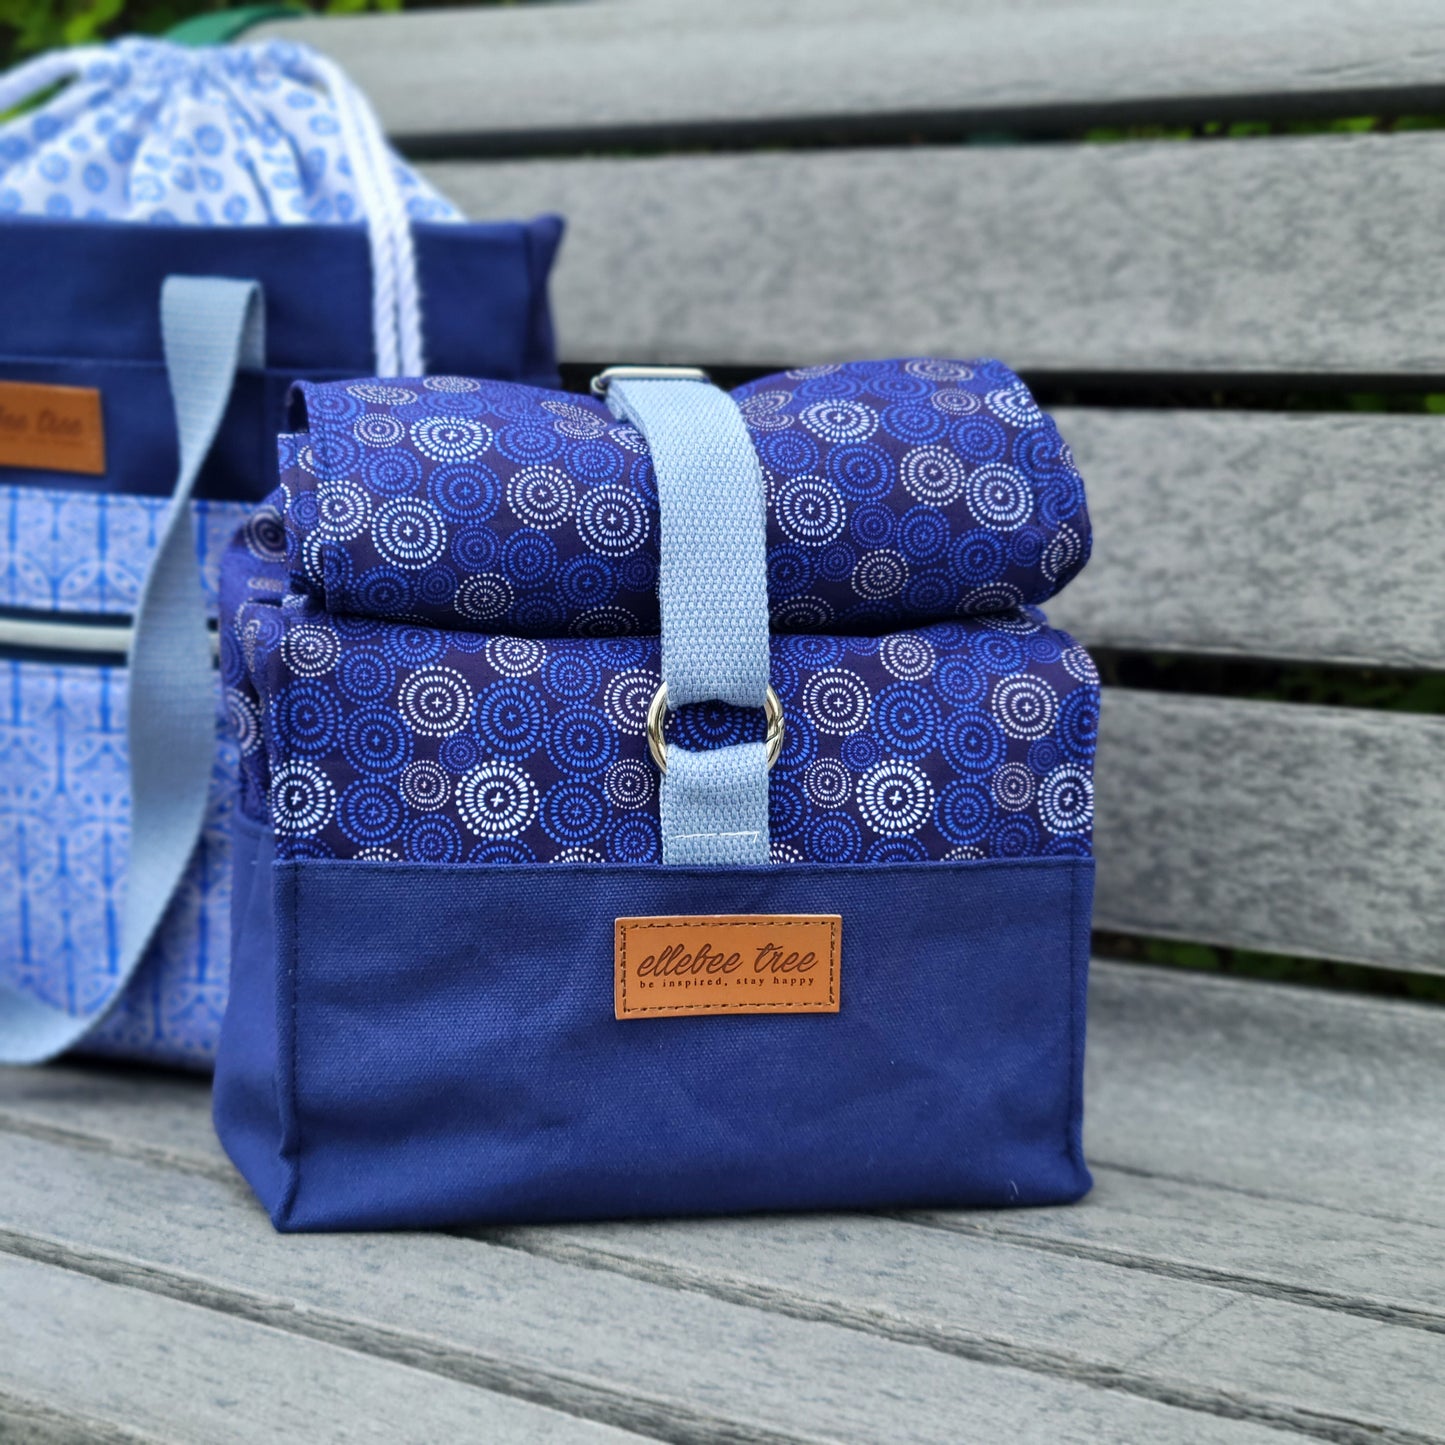 Chado Camelot Collab 'Let's Roll Out' Midsize Project Bag